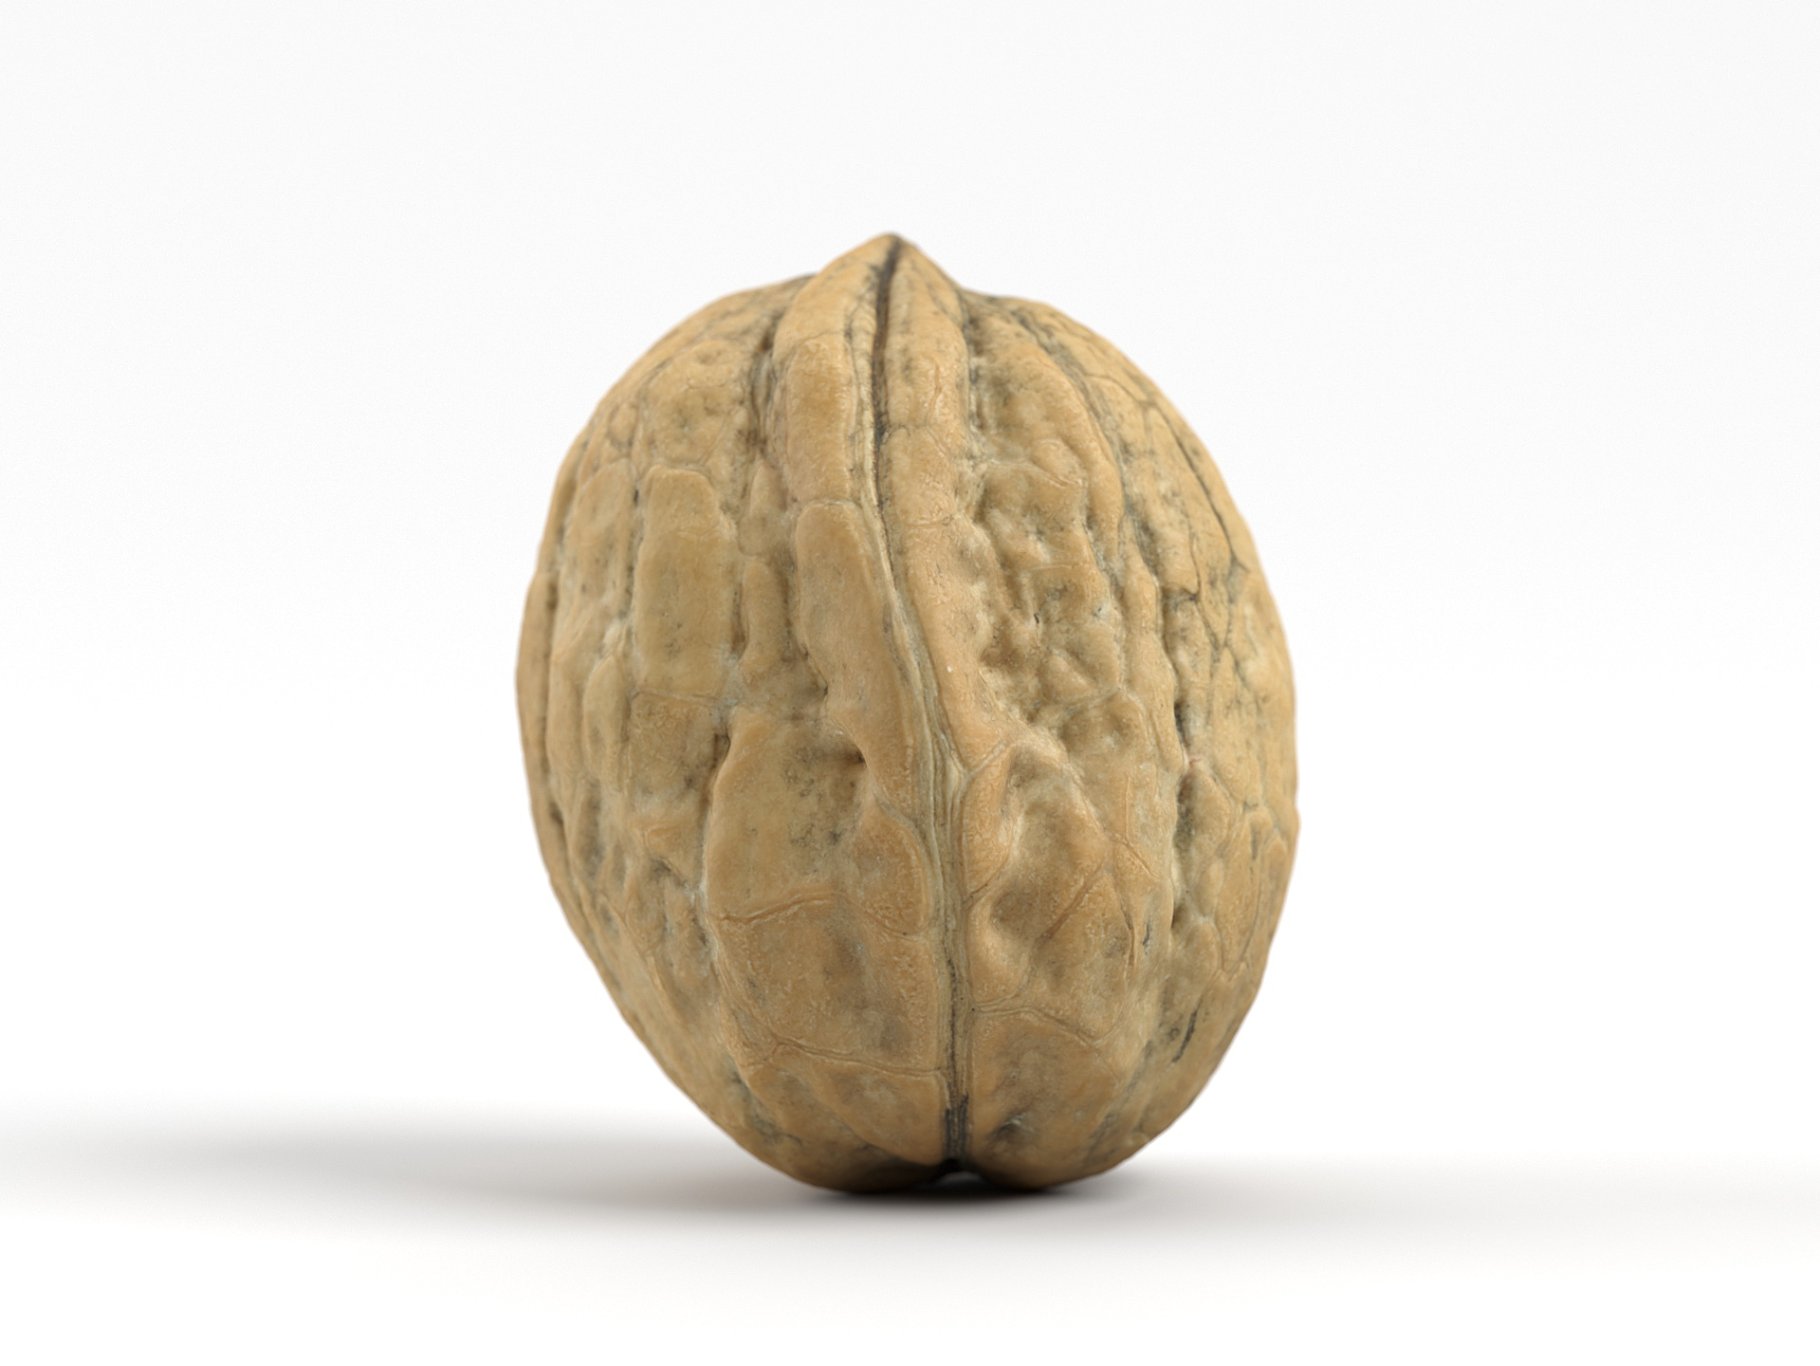 The image of a nut and others.